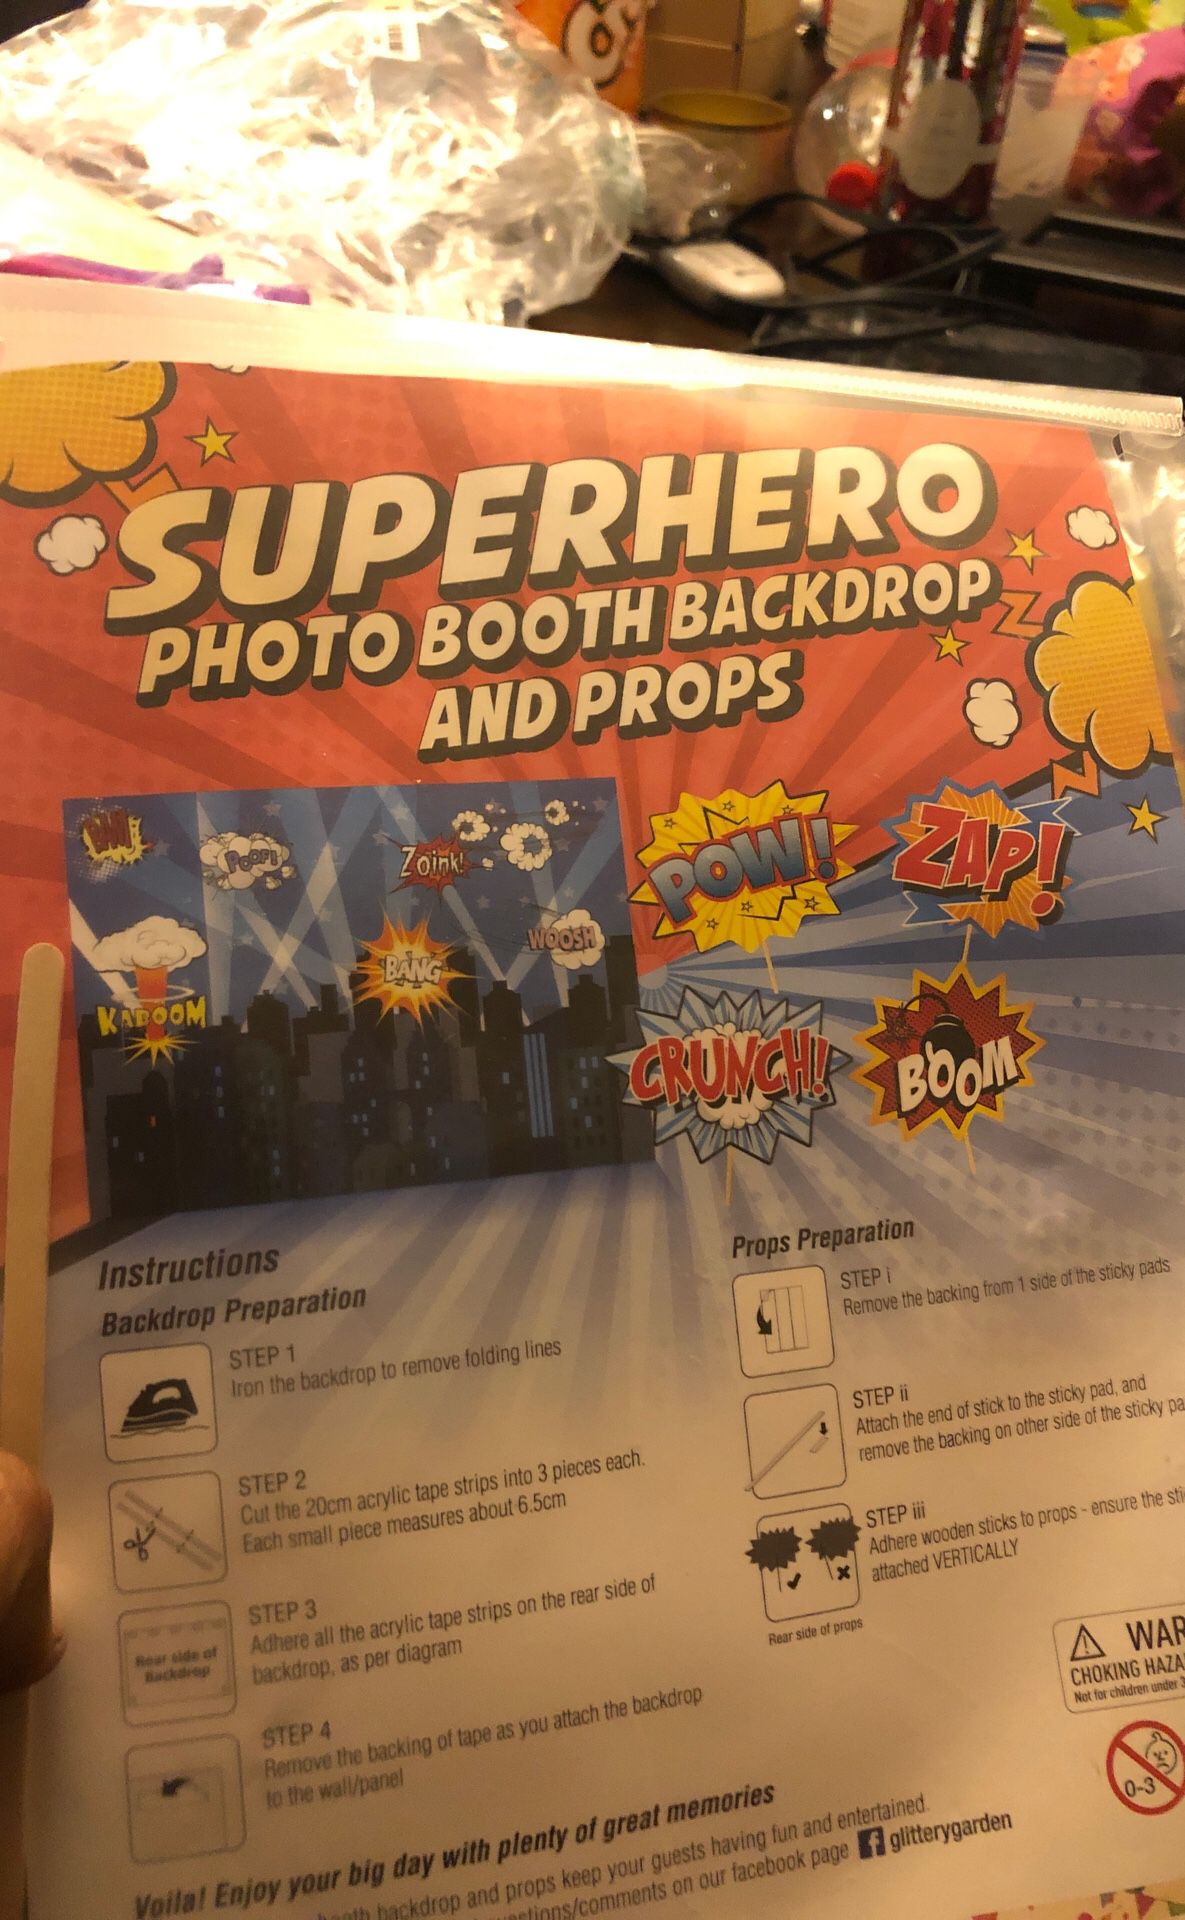 Super hero photo booth backdrop and props